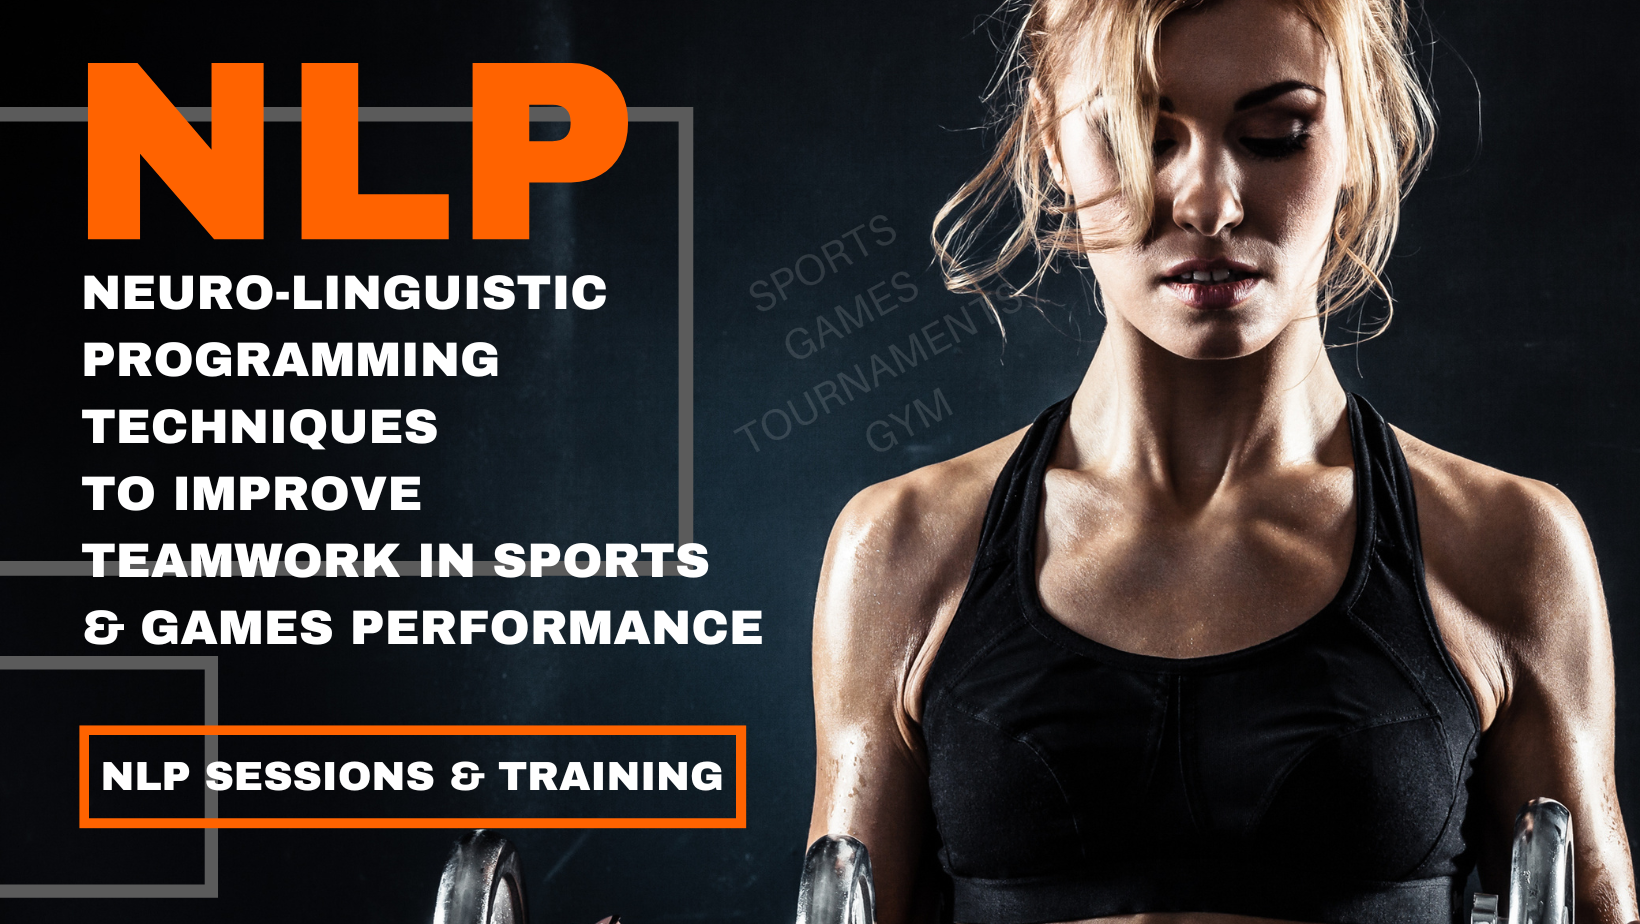 NLP techniques to improve teamwork in sports & games performance - Mumbai